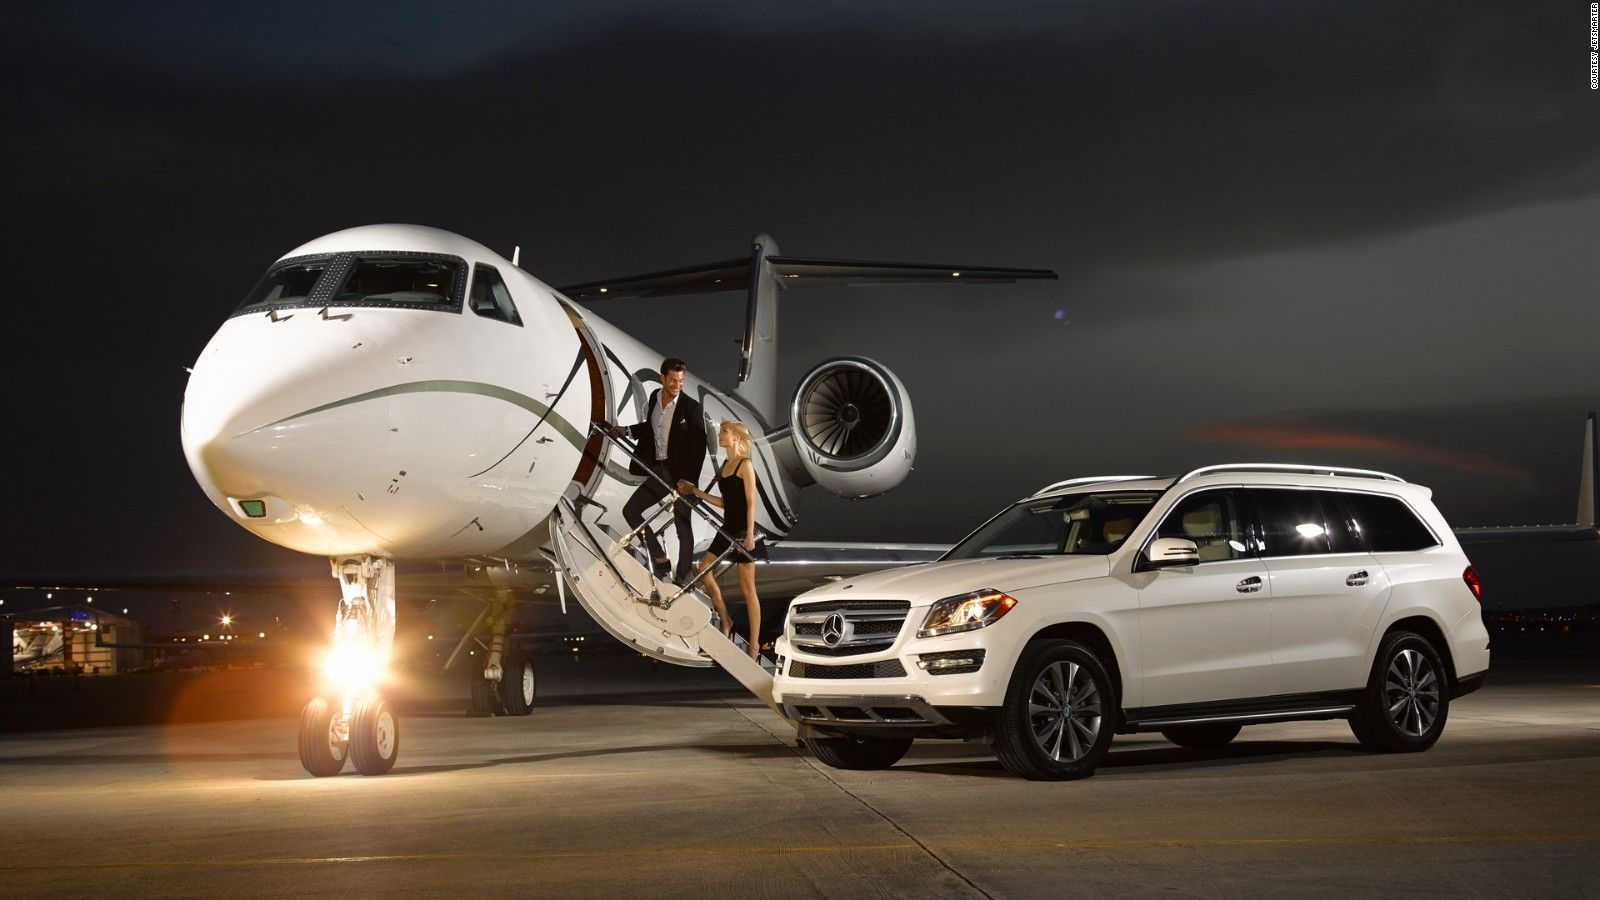 Private jet rentals: When you need one in a jiffy